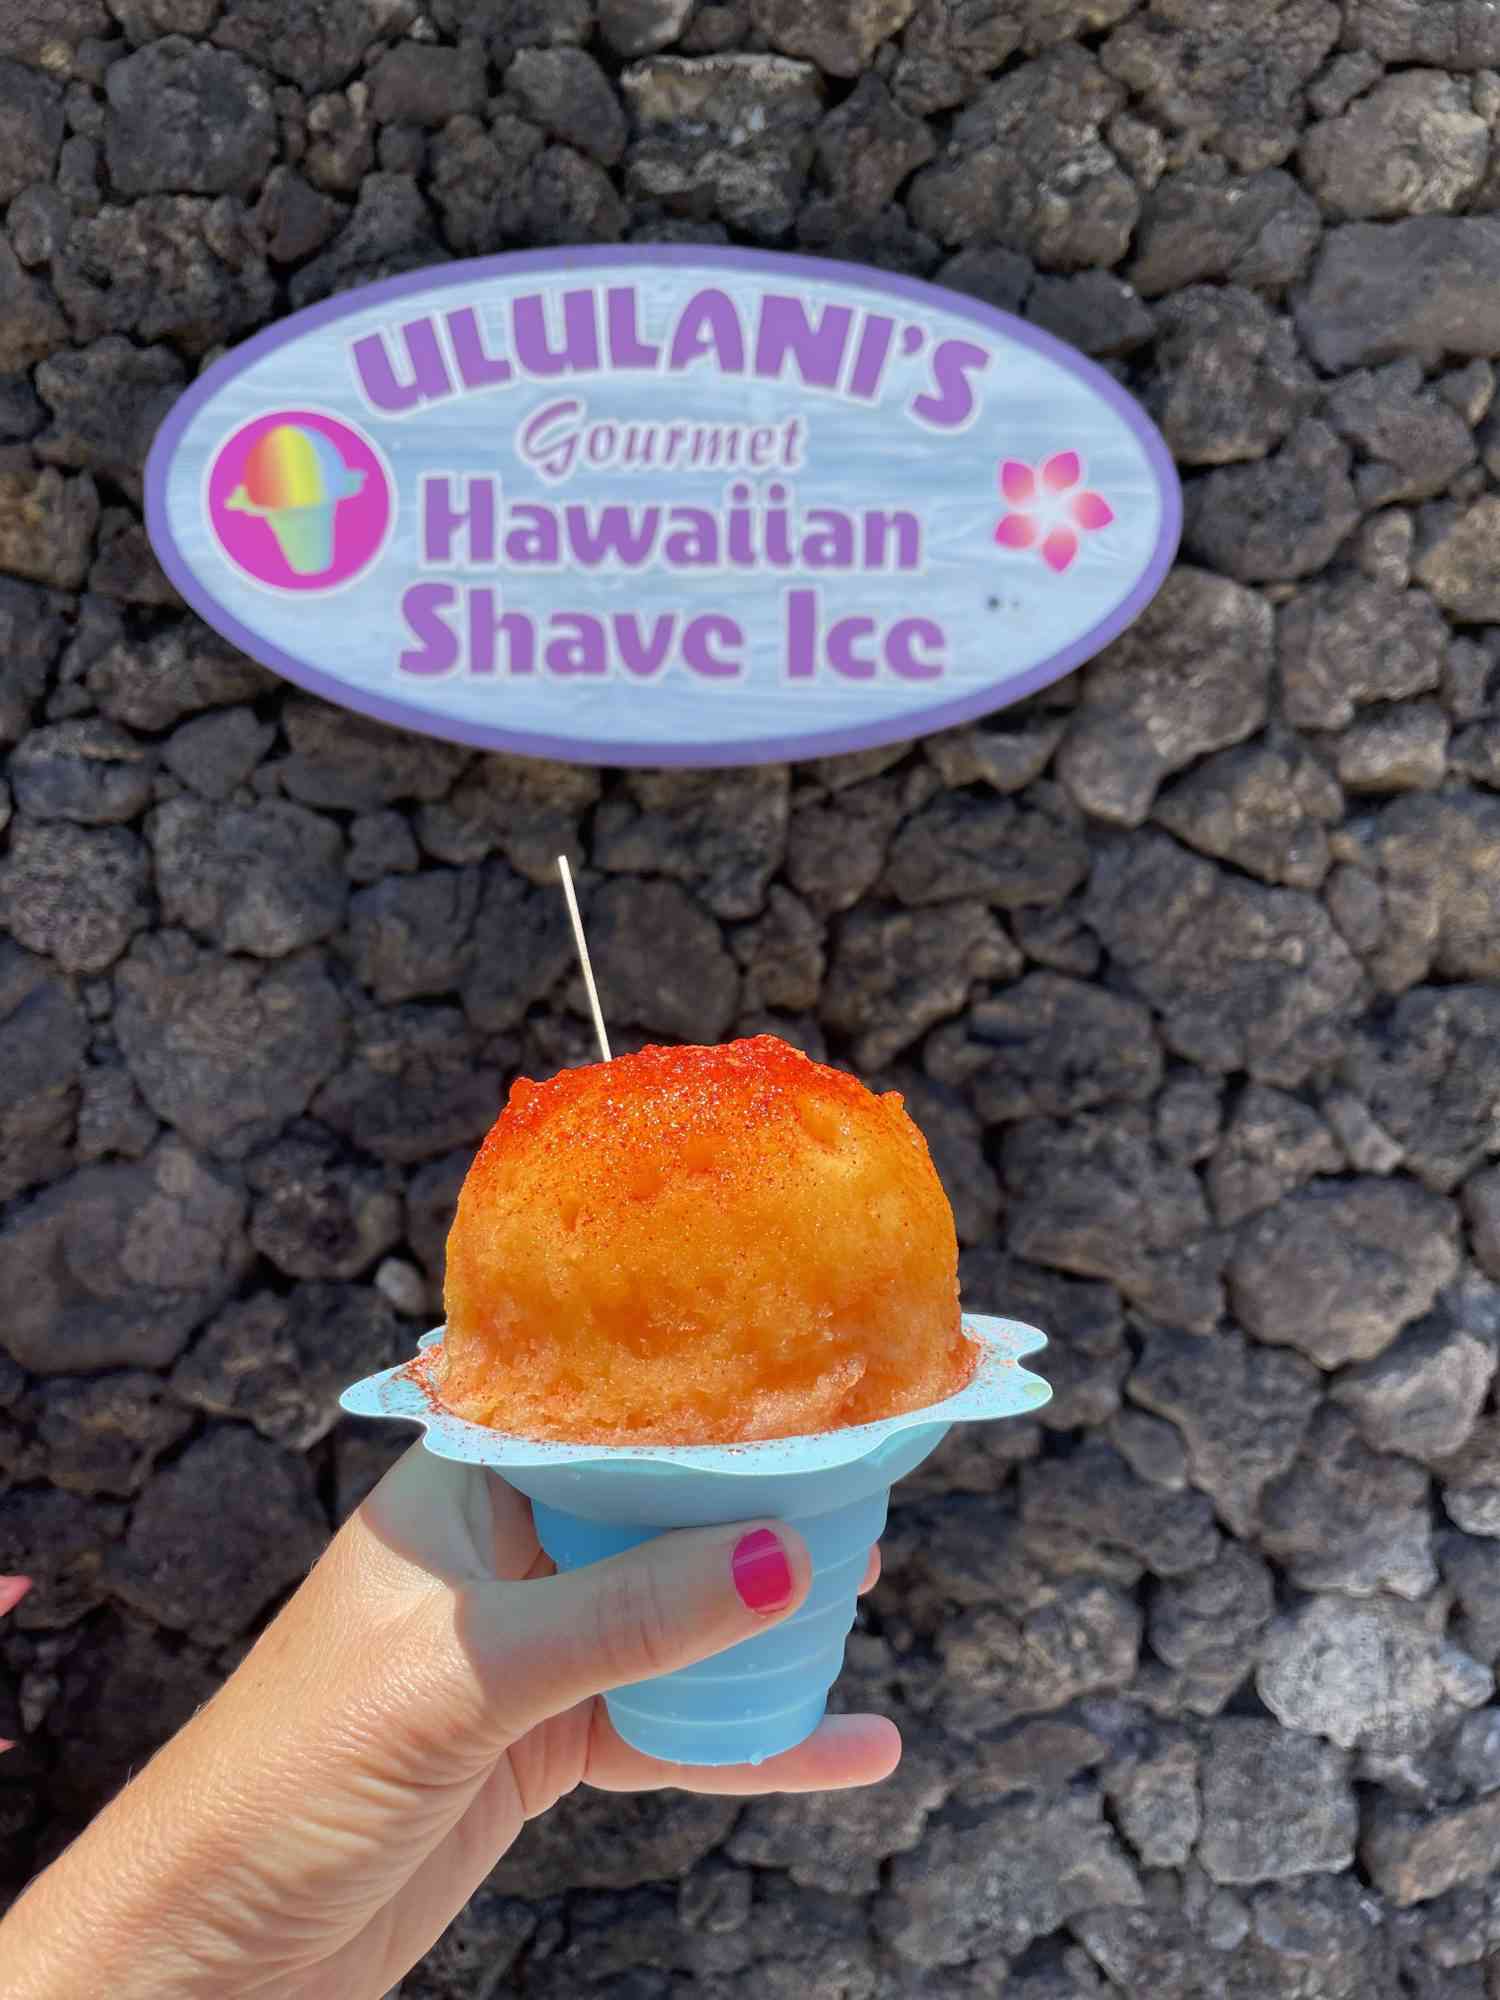 Ululani's shave ice single with sign in background